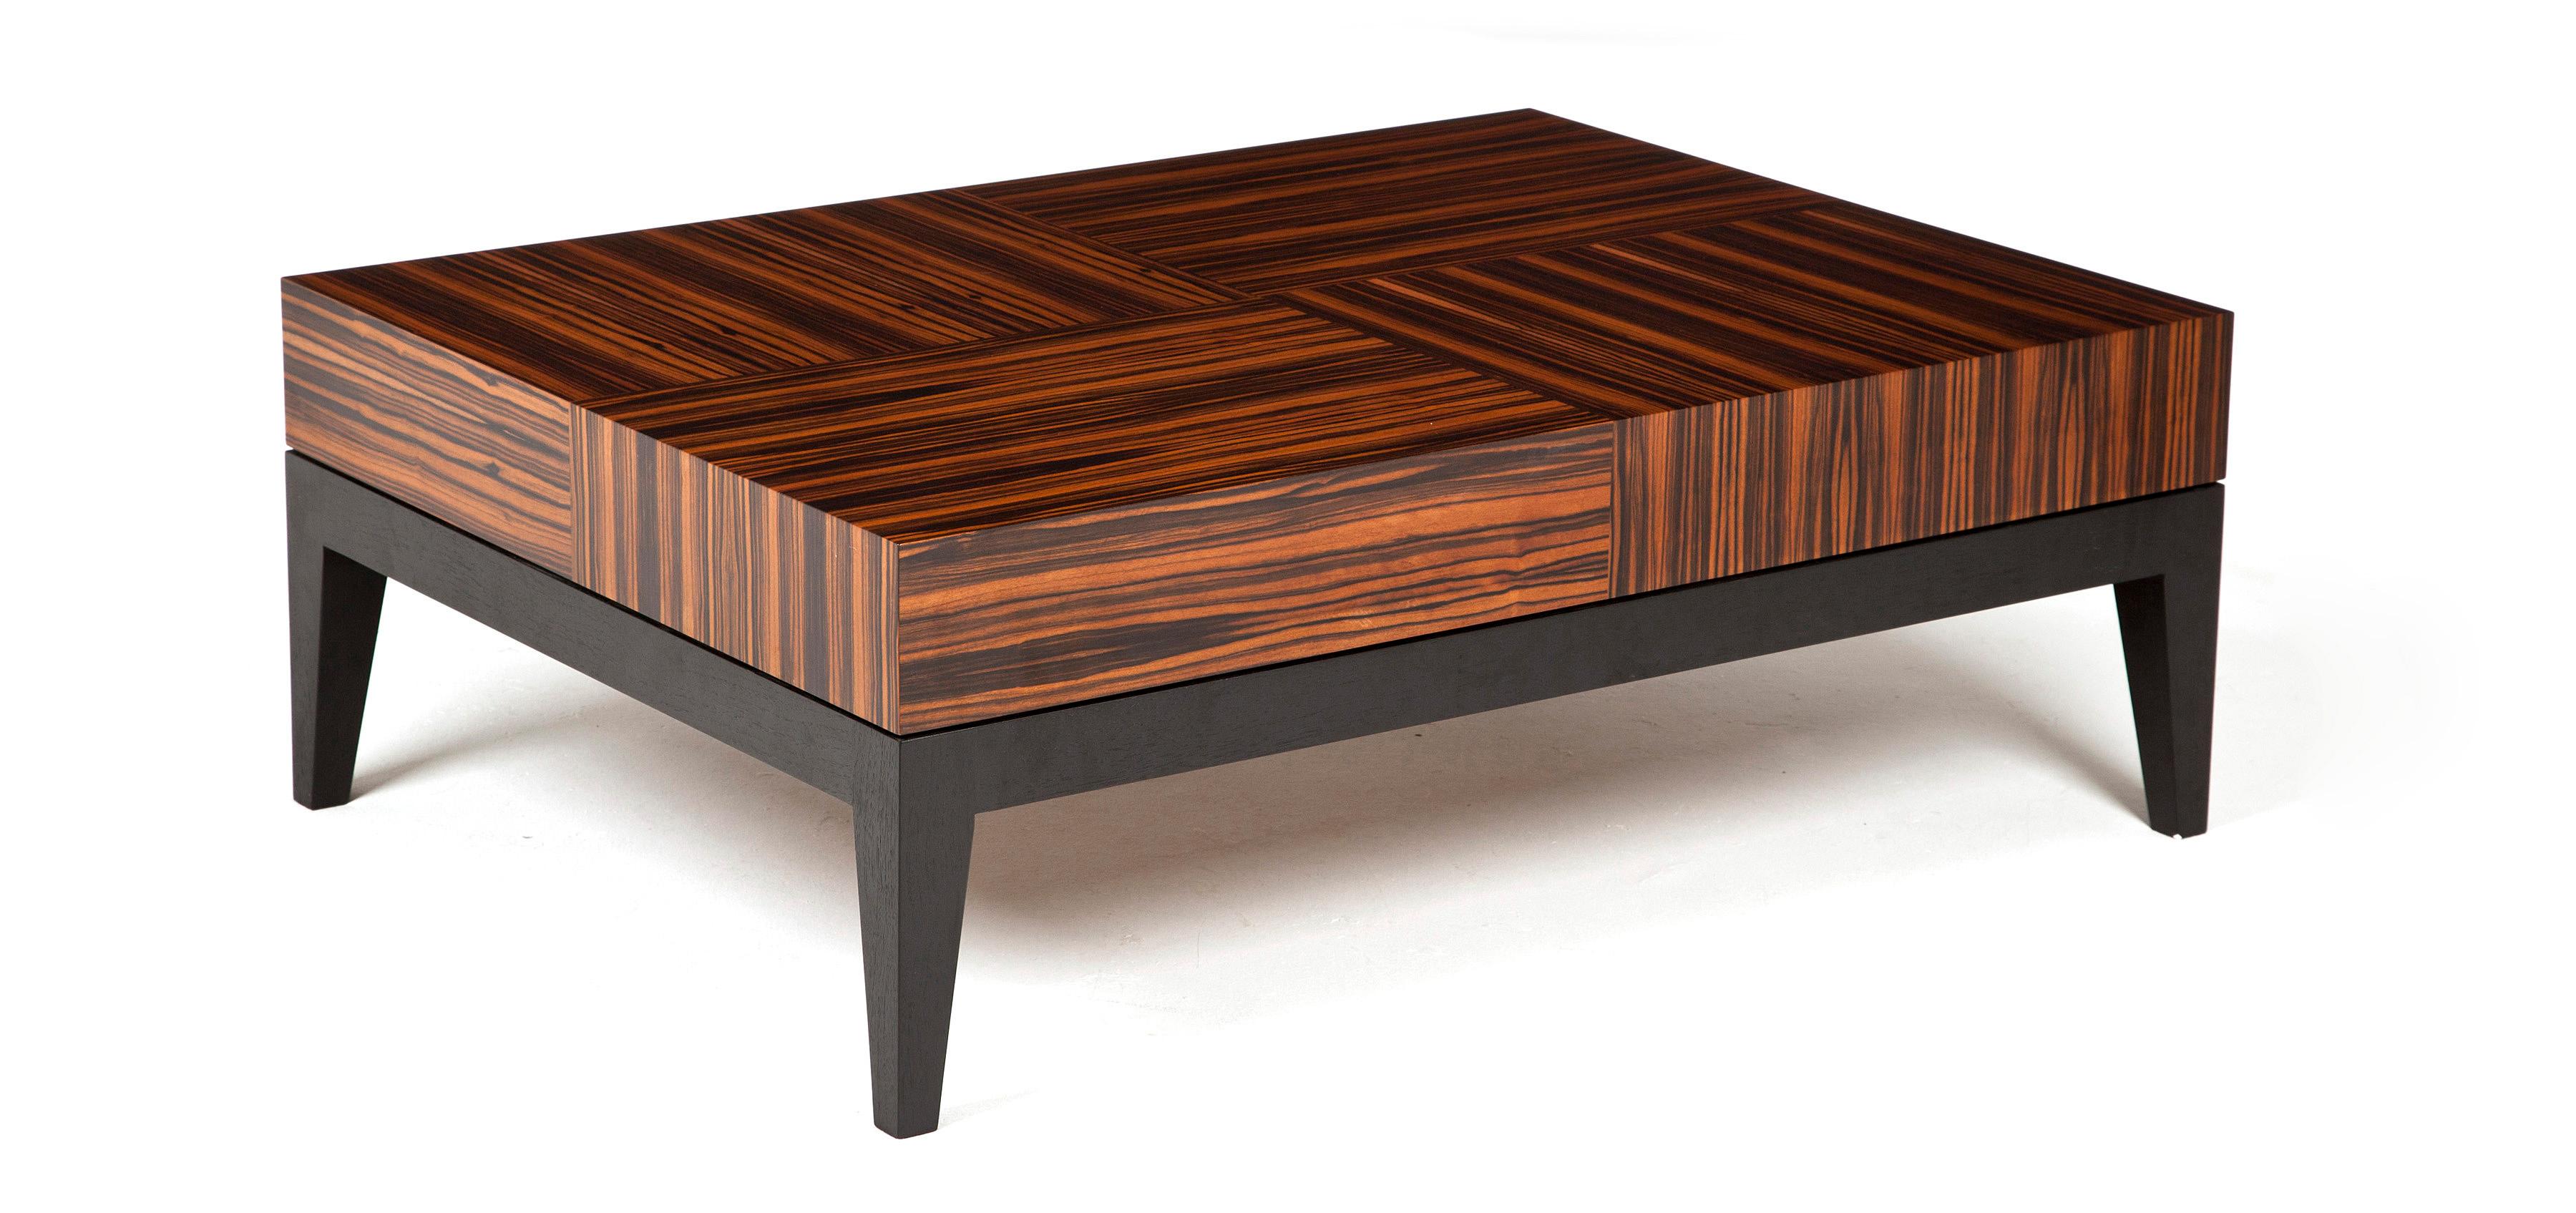 Statement rectangular coffee table with a bold and geometric Macassar ebony pattern and waterfall edge veneer detailing.

Stained walnut table base and legs.
Finished with a hard-wearing polyurethane lacquer.